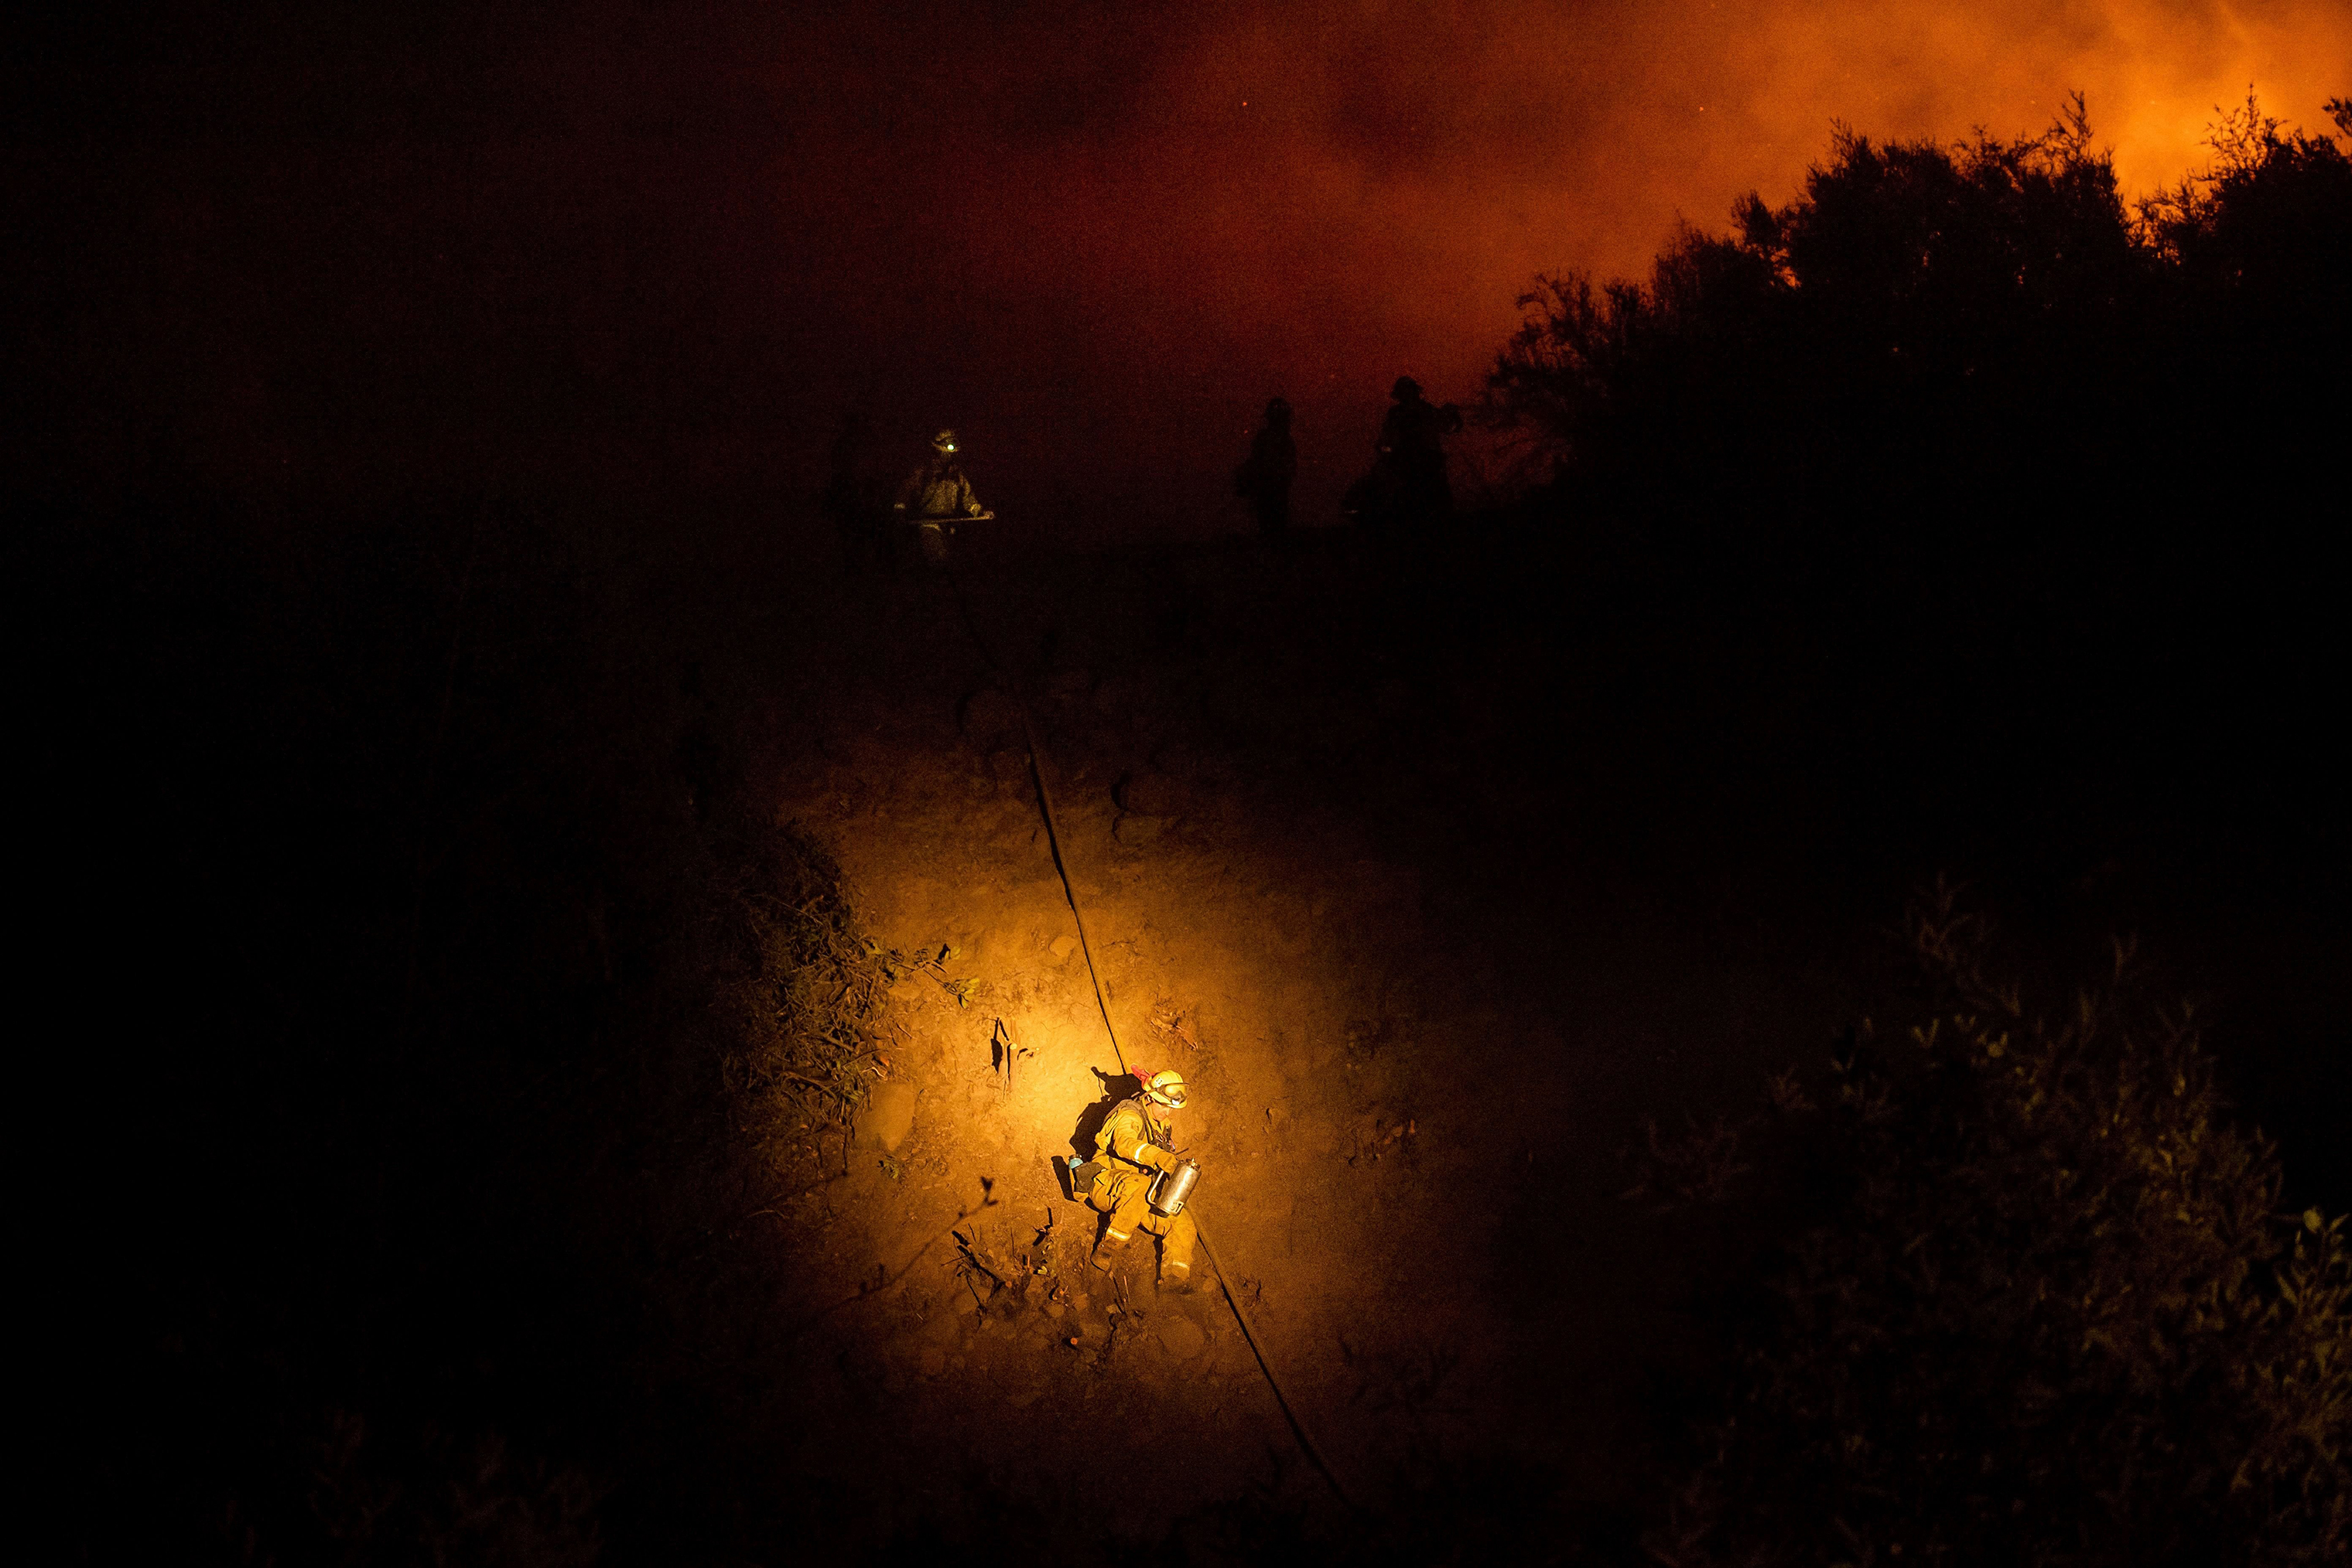 Firefighter Brandon Esquer makes his way down a hillside while battling the Ranch Fire, part of the Mendocino Complex Fire, near Ladoga, Calif on Aug. 7. (Noah Berger—AP/Shutterstock)